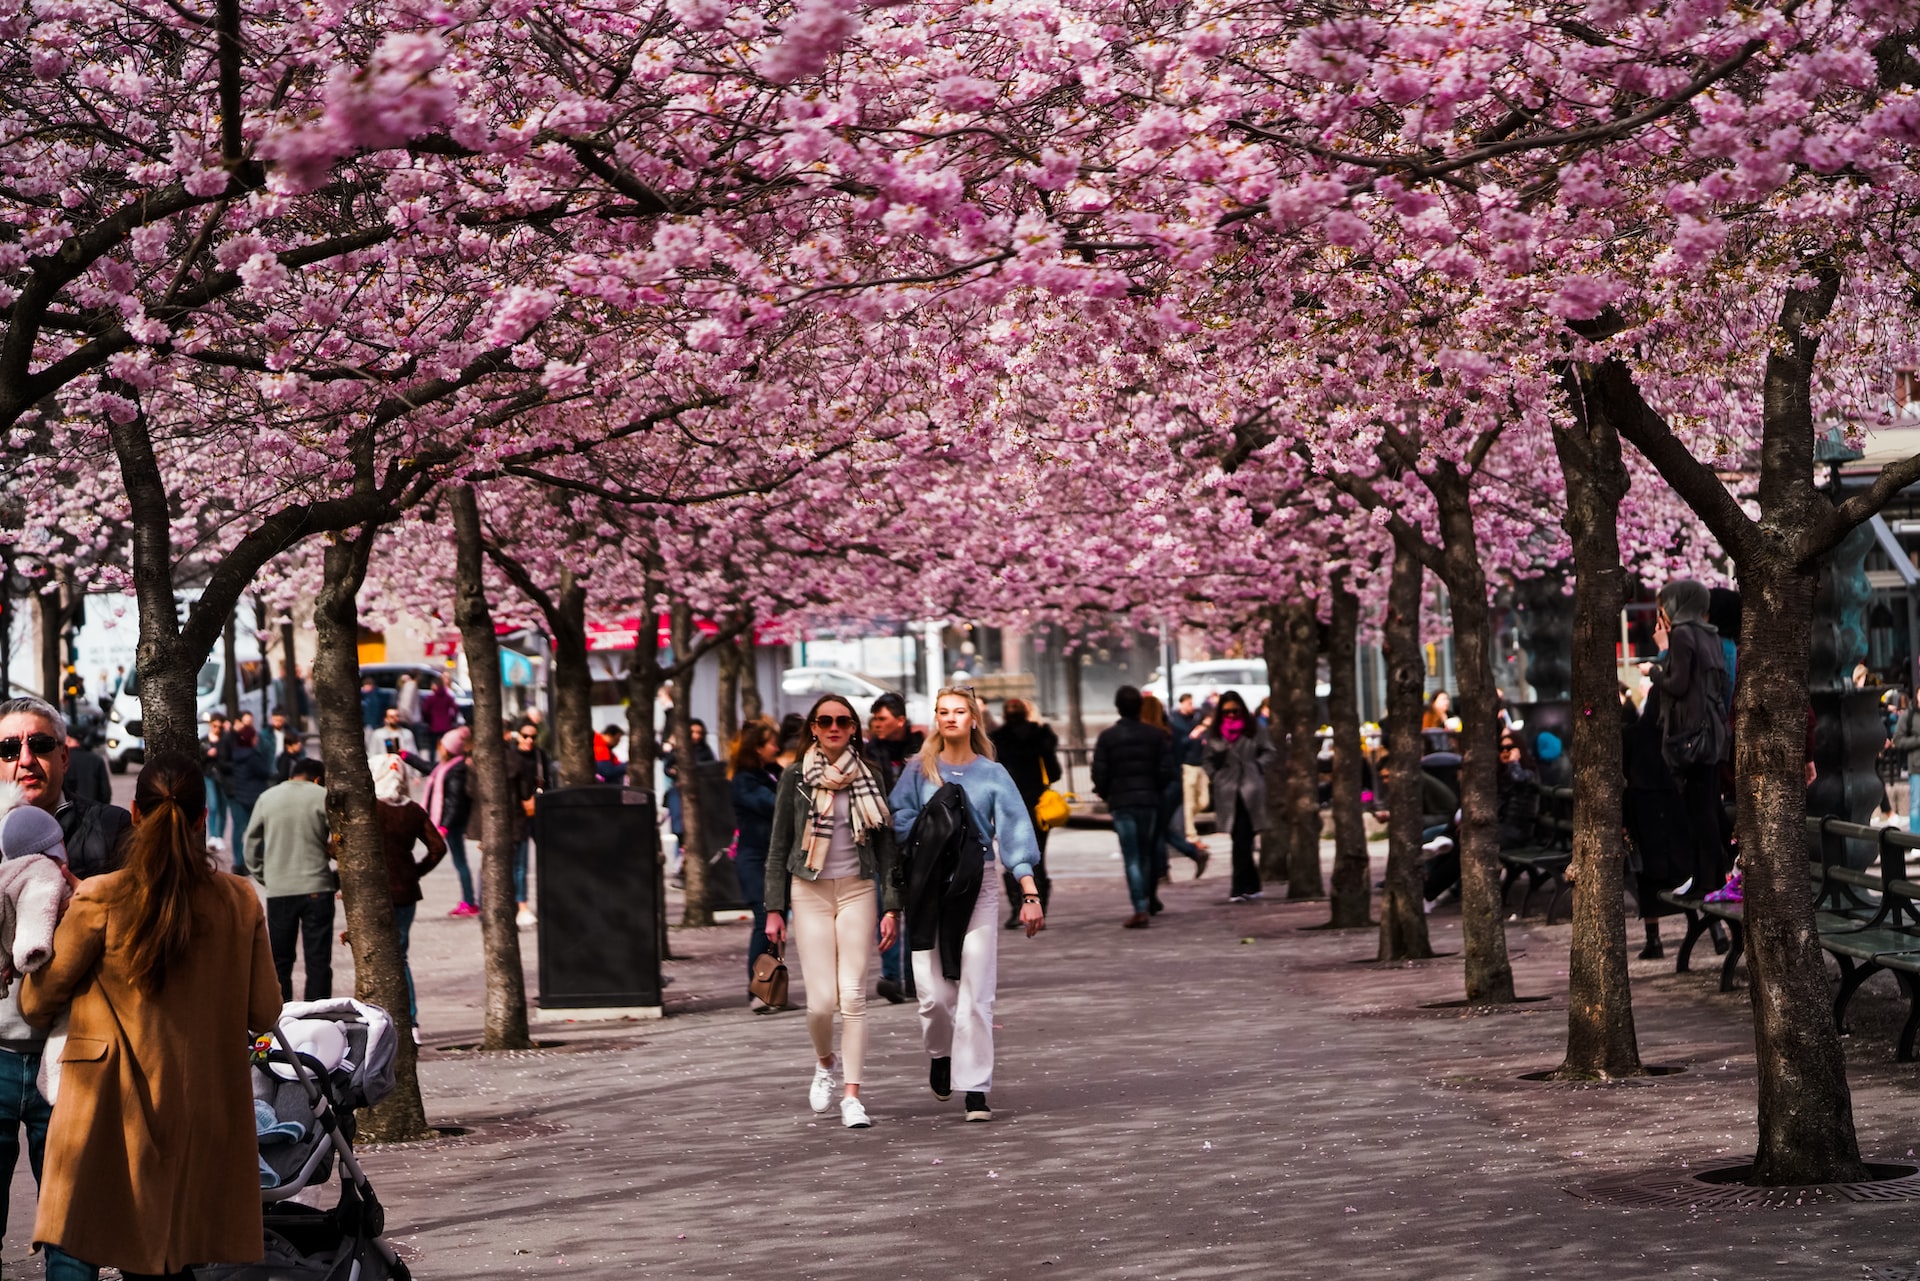 Two girls walking down a sidewalk with a canopy of cherry blossoms.